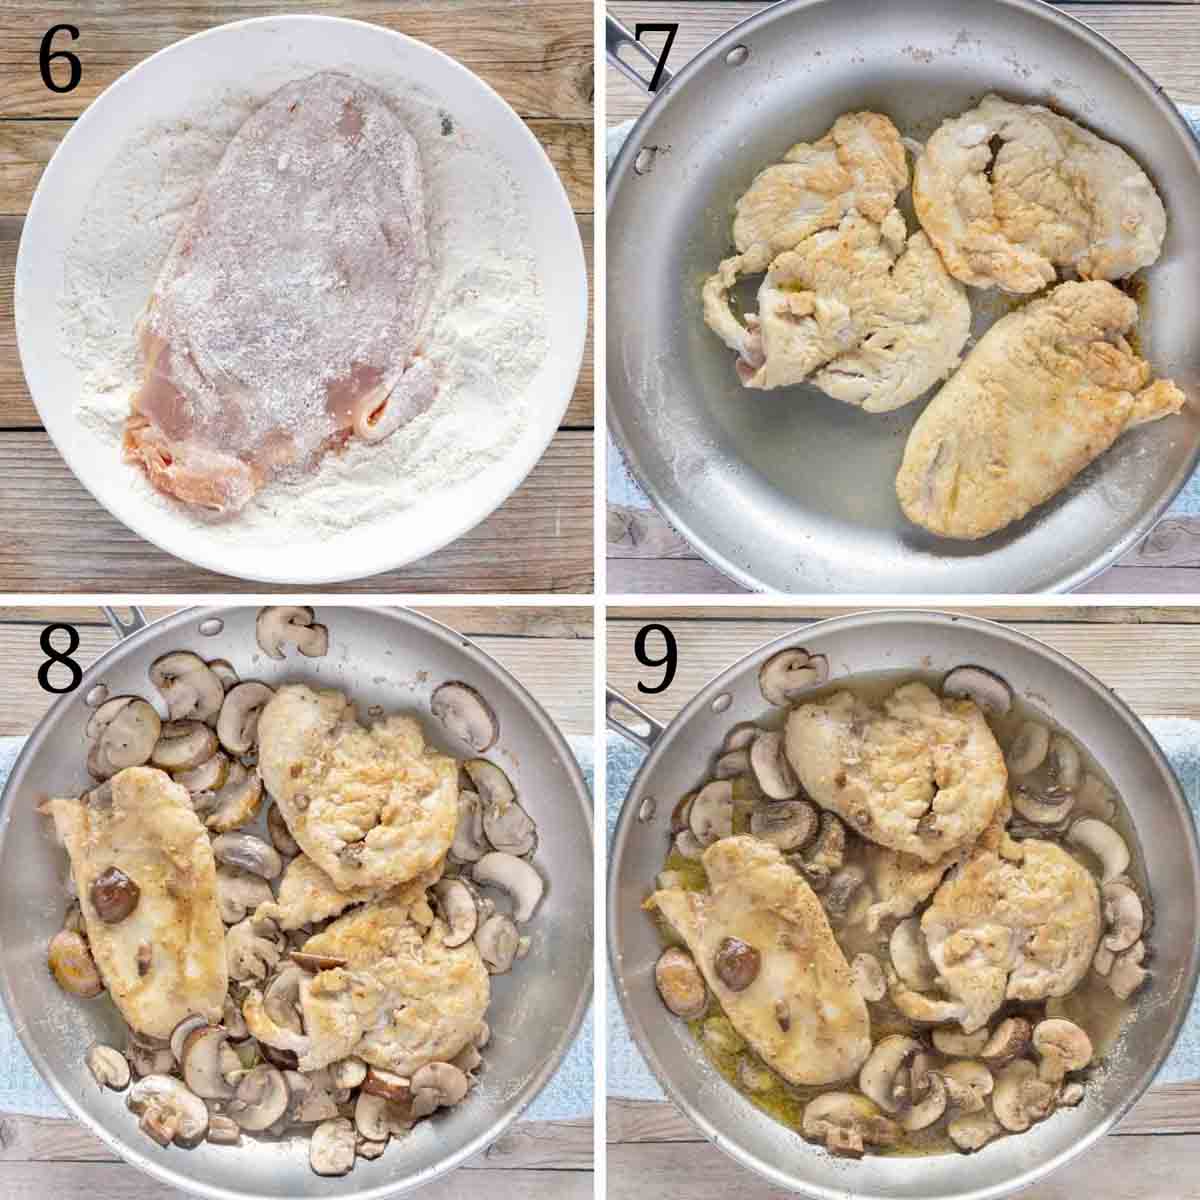 four images showing how to cook the chicken and mushrooms